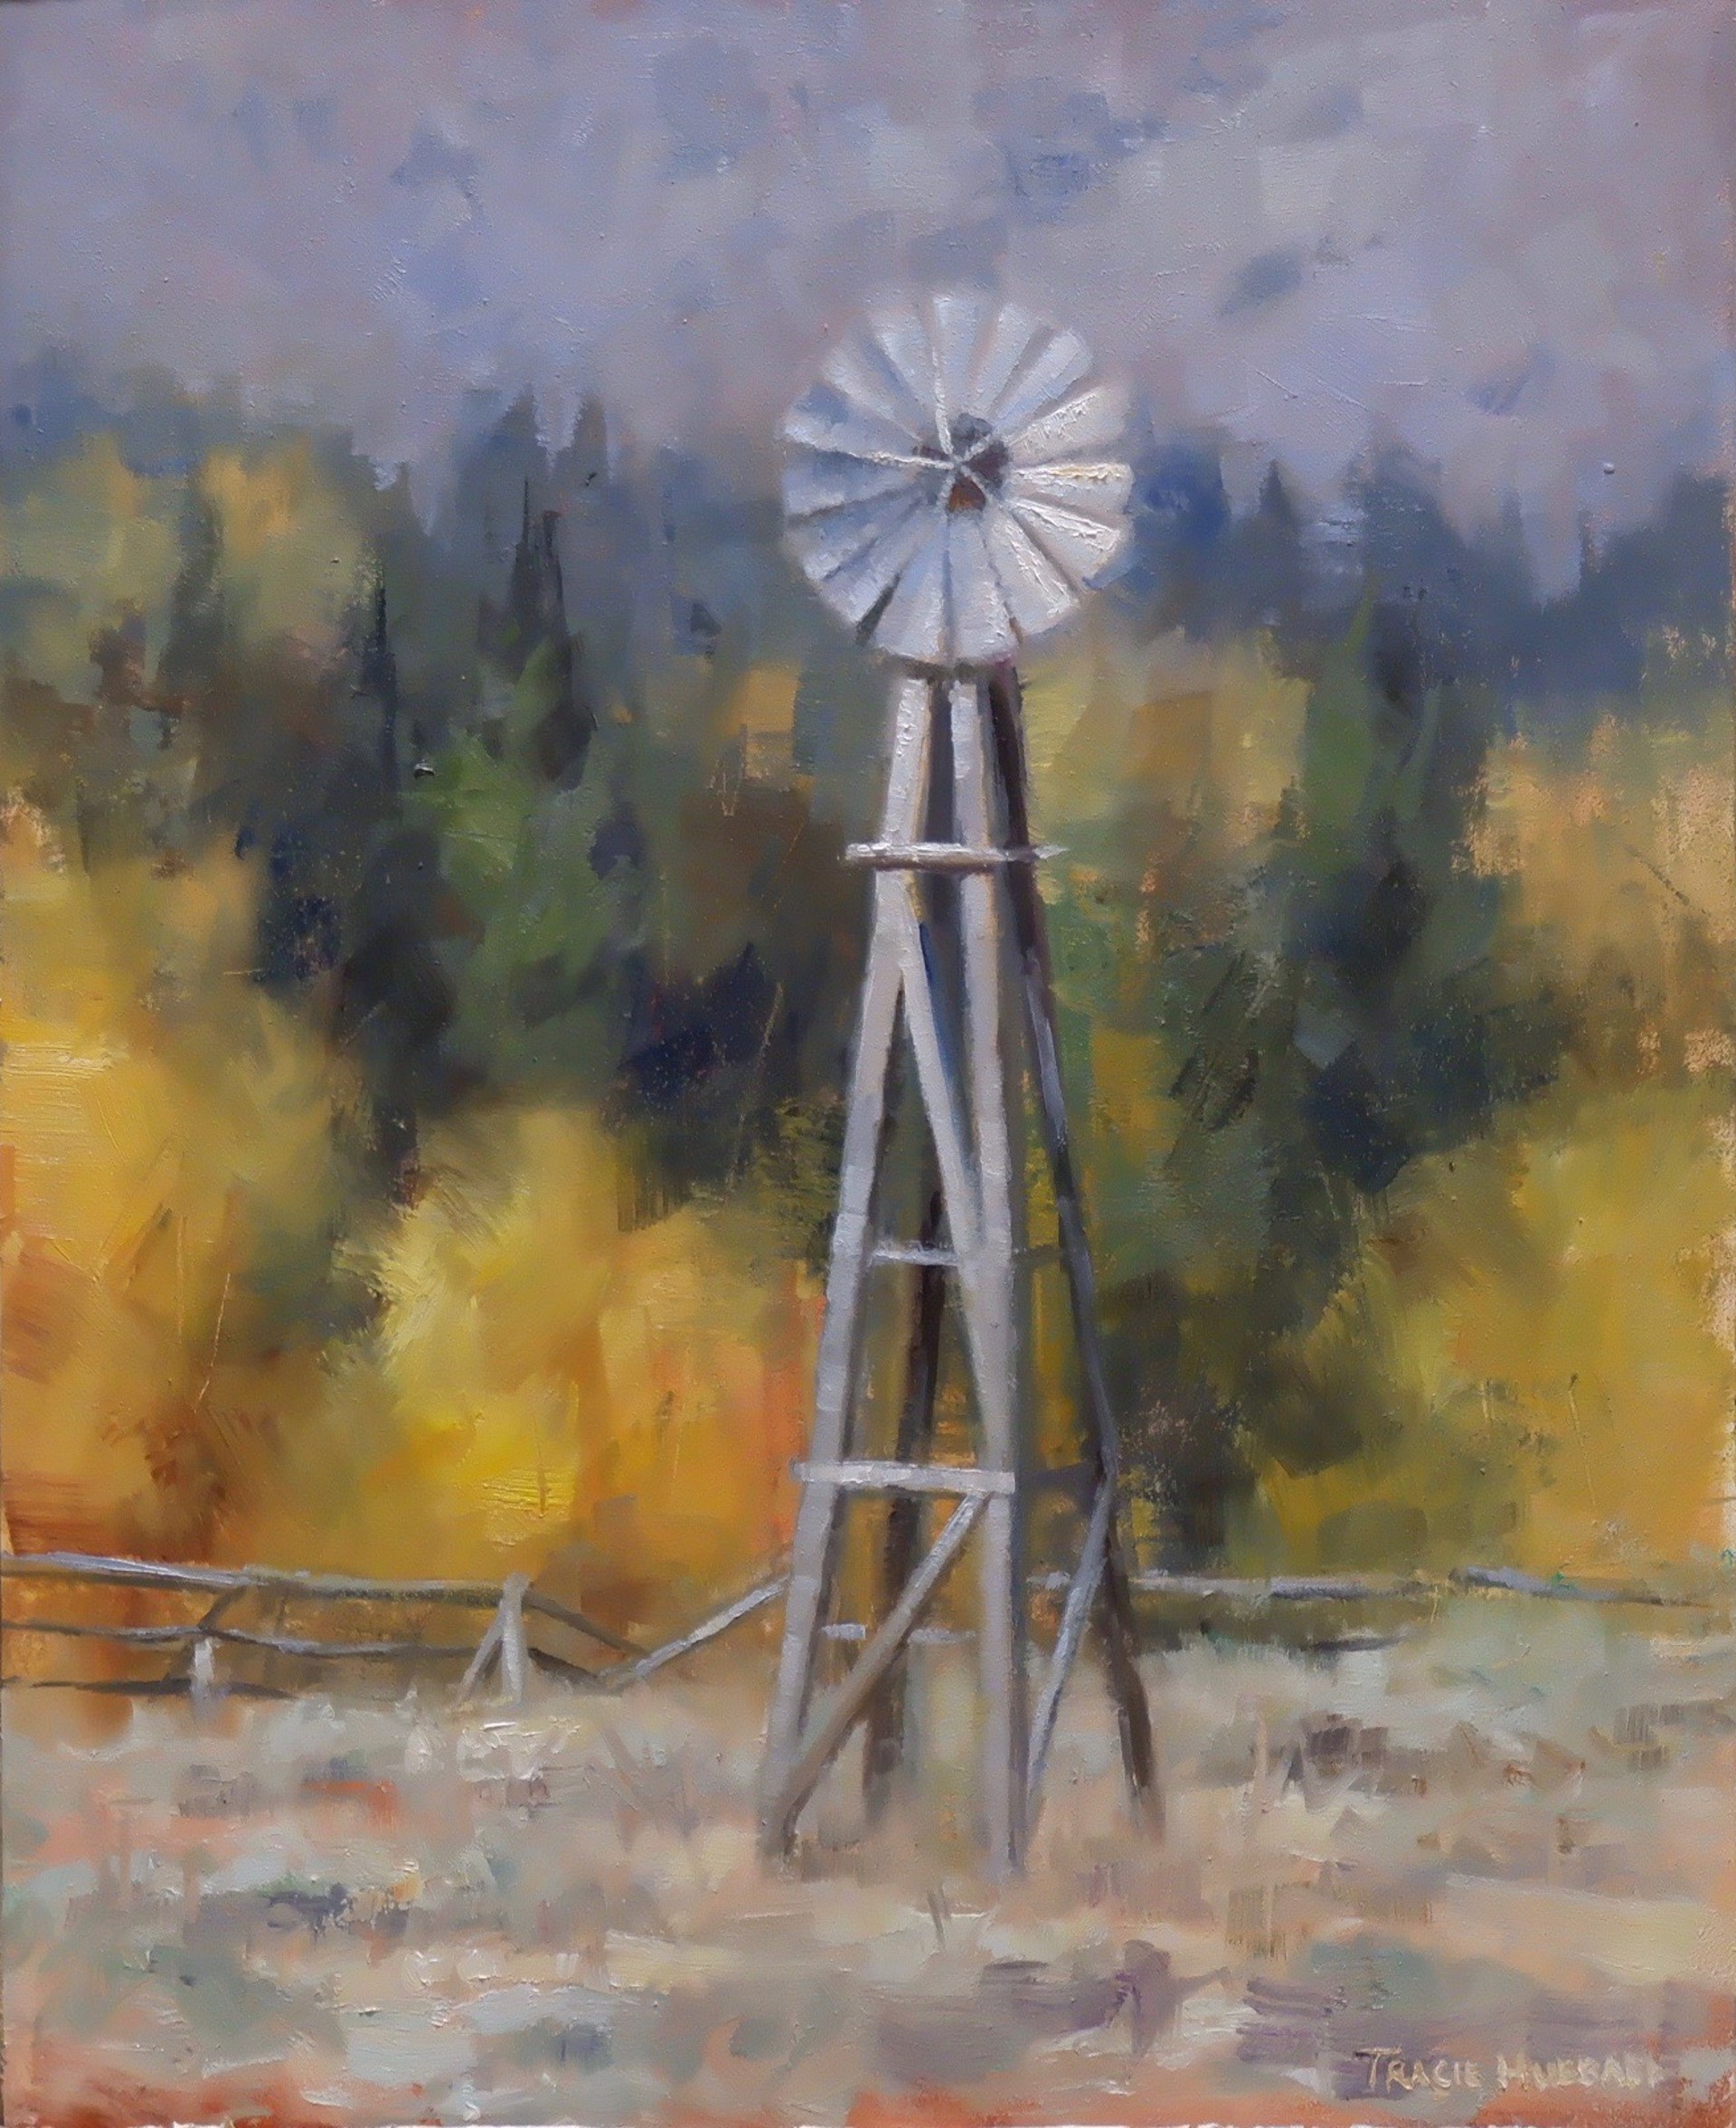 Roadside Attraction by Tracie Hubbard